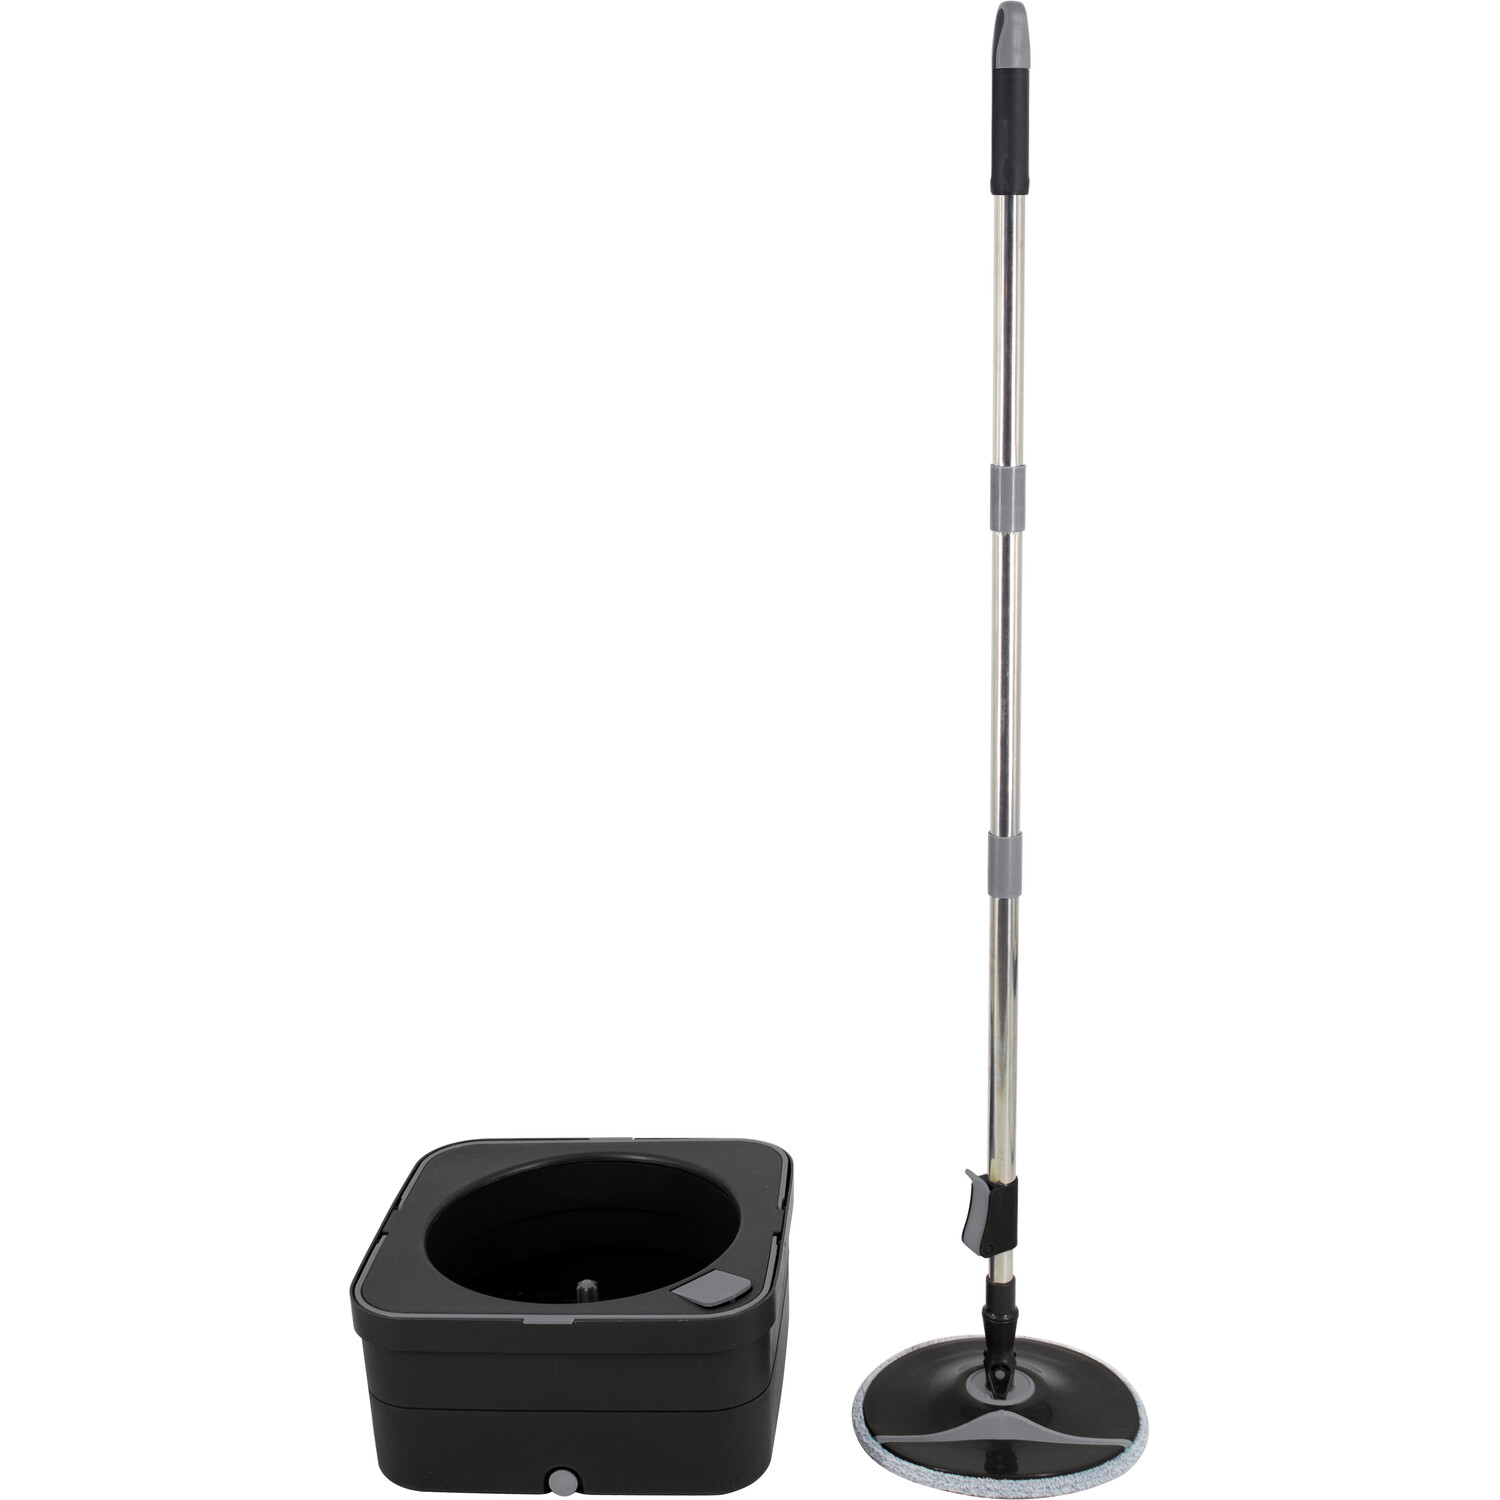 Argento Square Spin Mop and Bucket - Black Image